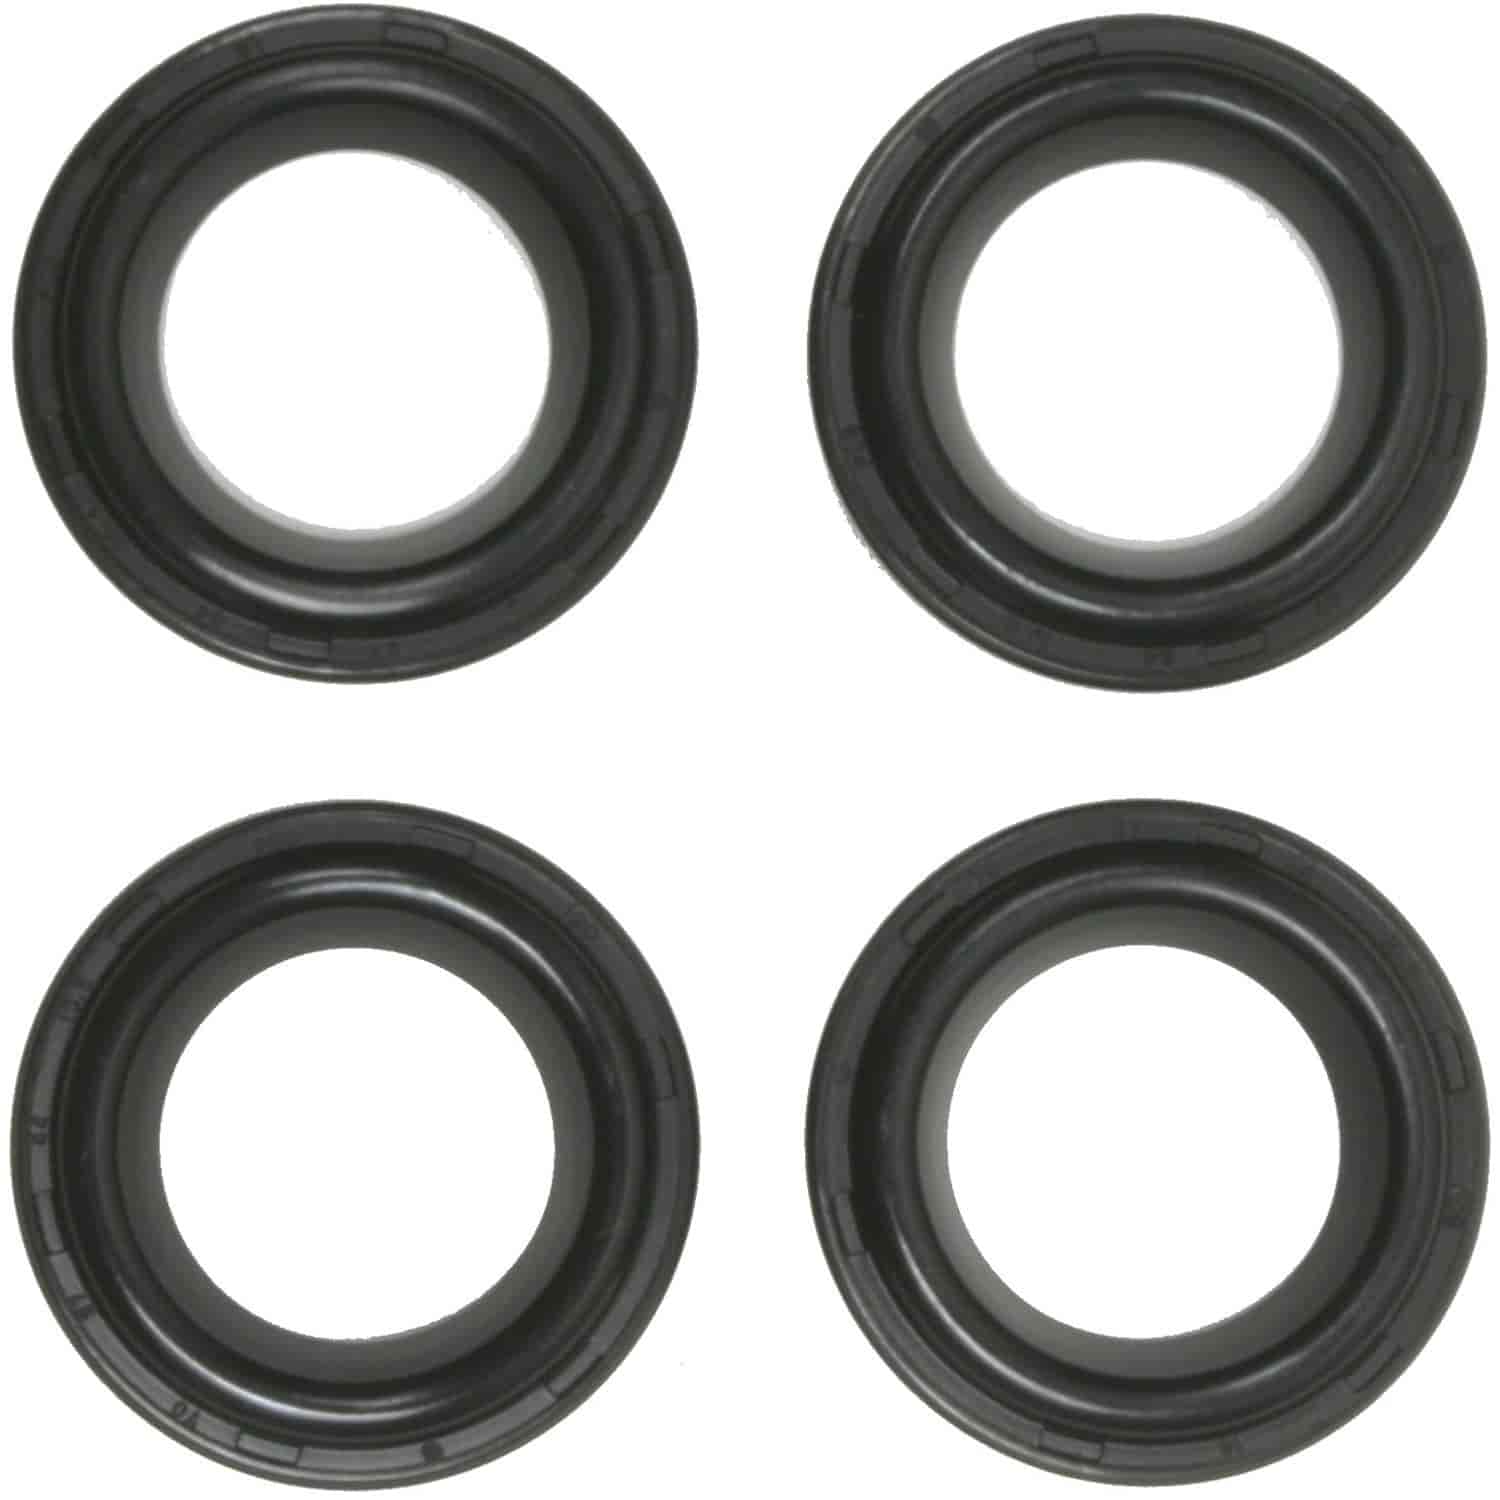 Spark Plug Tube Seal for Hyundai 1.5L DOHC G4FK Accent From 12-9-96 to 98